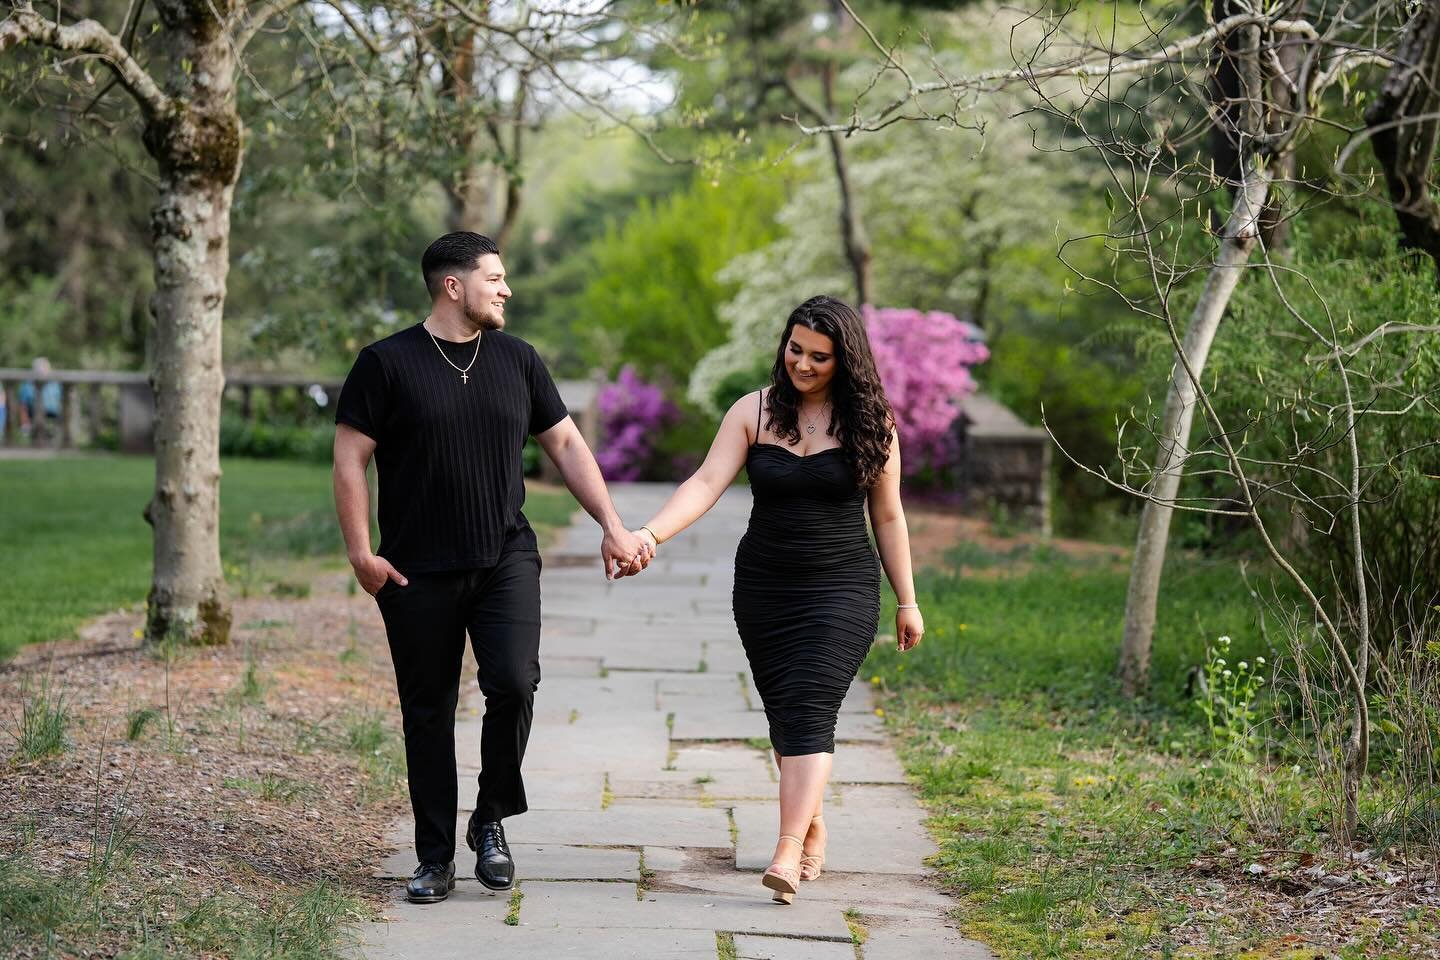 Gina + Alex - Ringwood, NJ 🌼⛅️
.
Alex and Gina were in high school when they met in 2018... Alex was the &ldquo;new kid&rdquo; in town and they happened to have one class together their Sophomore year. At first they started off as friends. Both had 